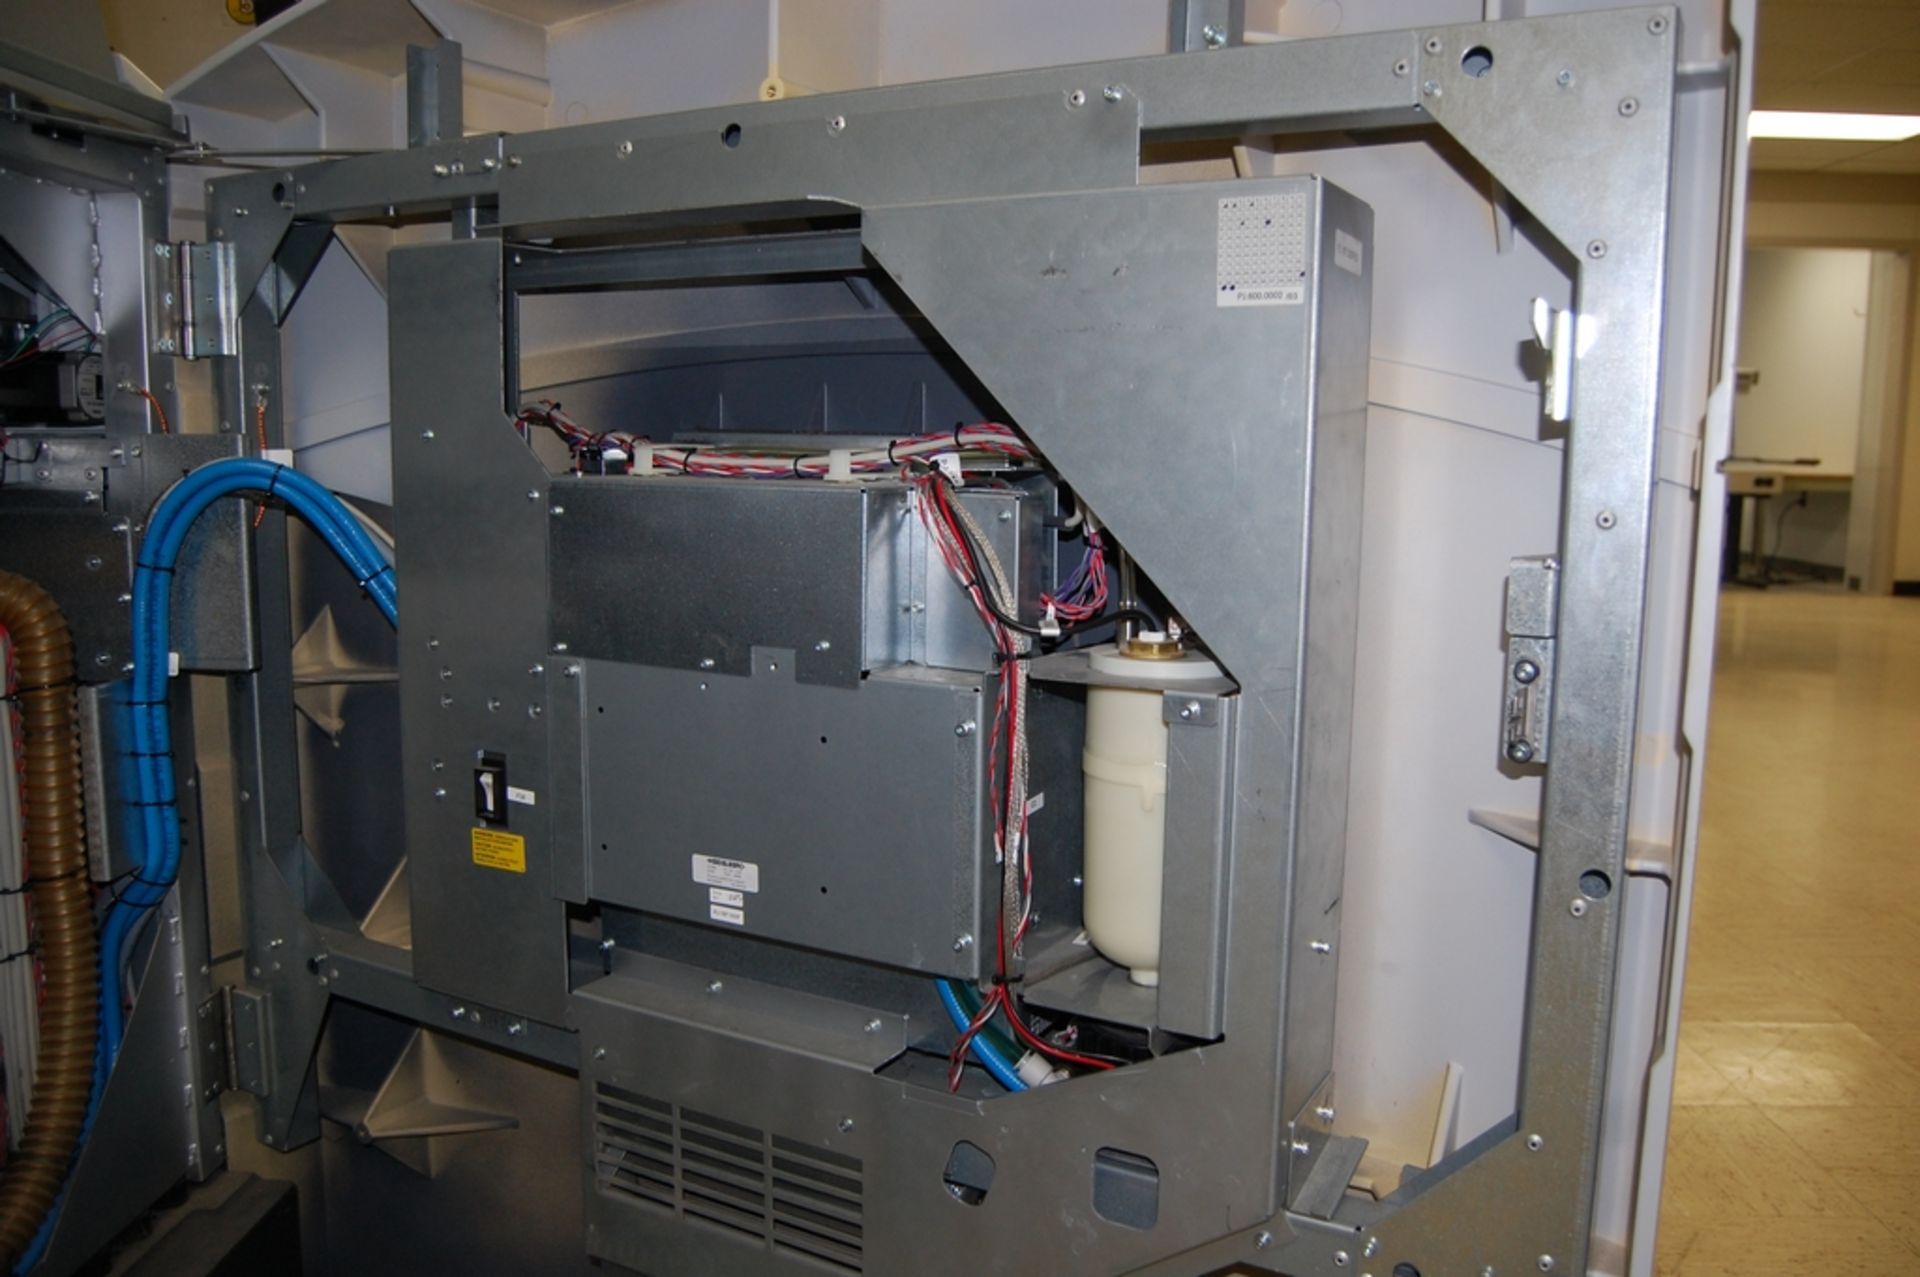 2008 Heidelberg Model Suprasetter A52/A74 Computer to Plate System - Image 15 of 20